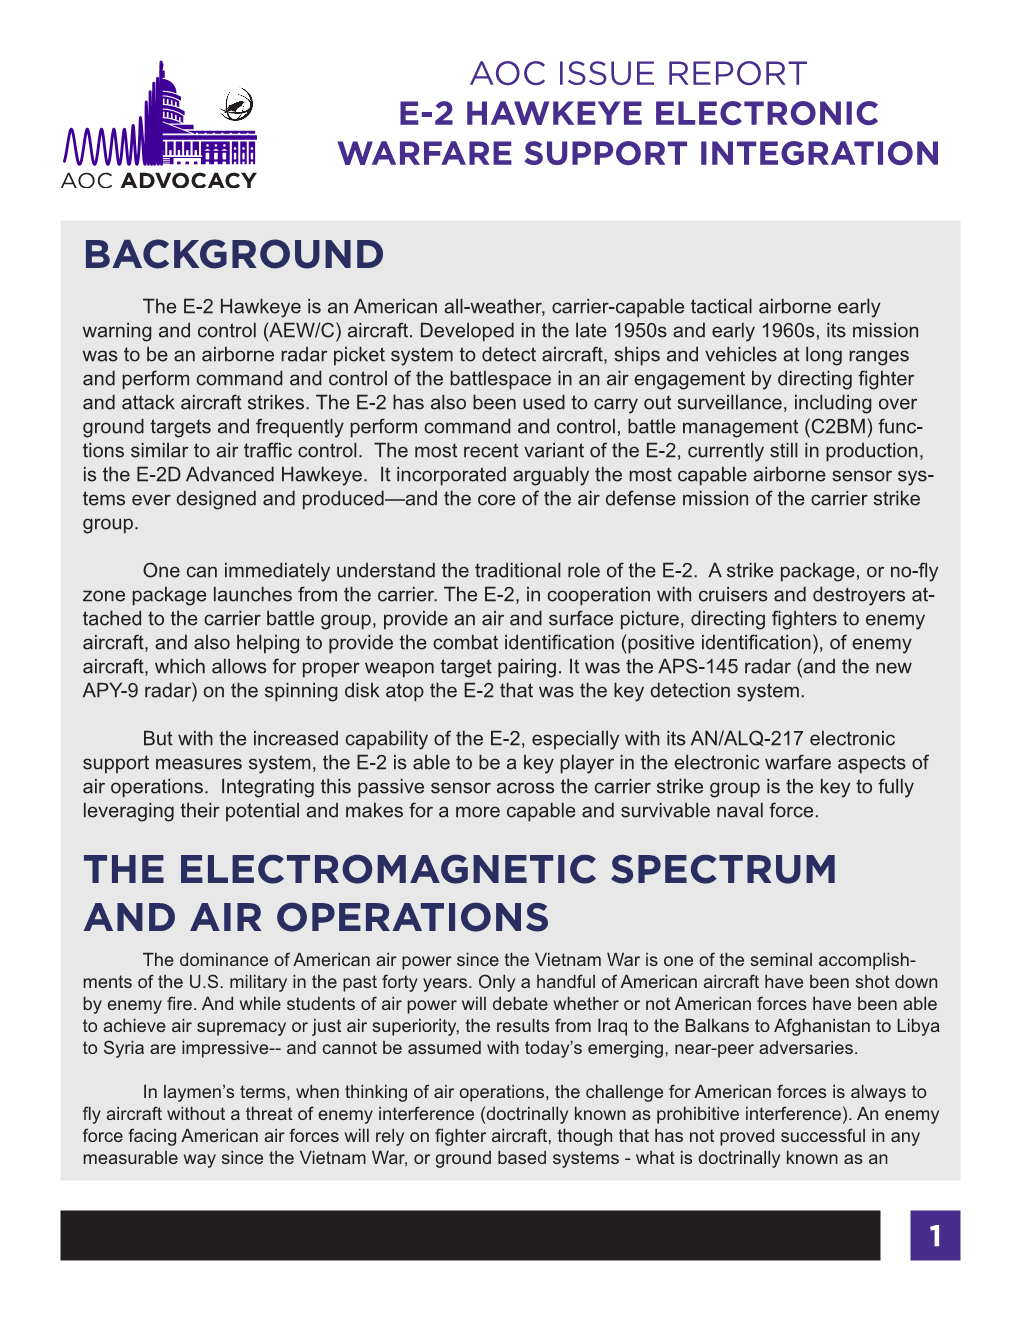 Background the Electromagnetic Spectrum and Air Operations